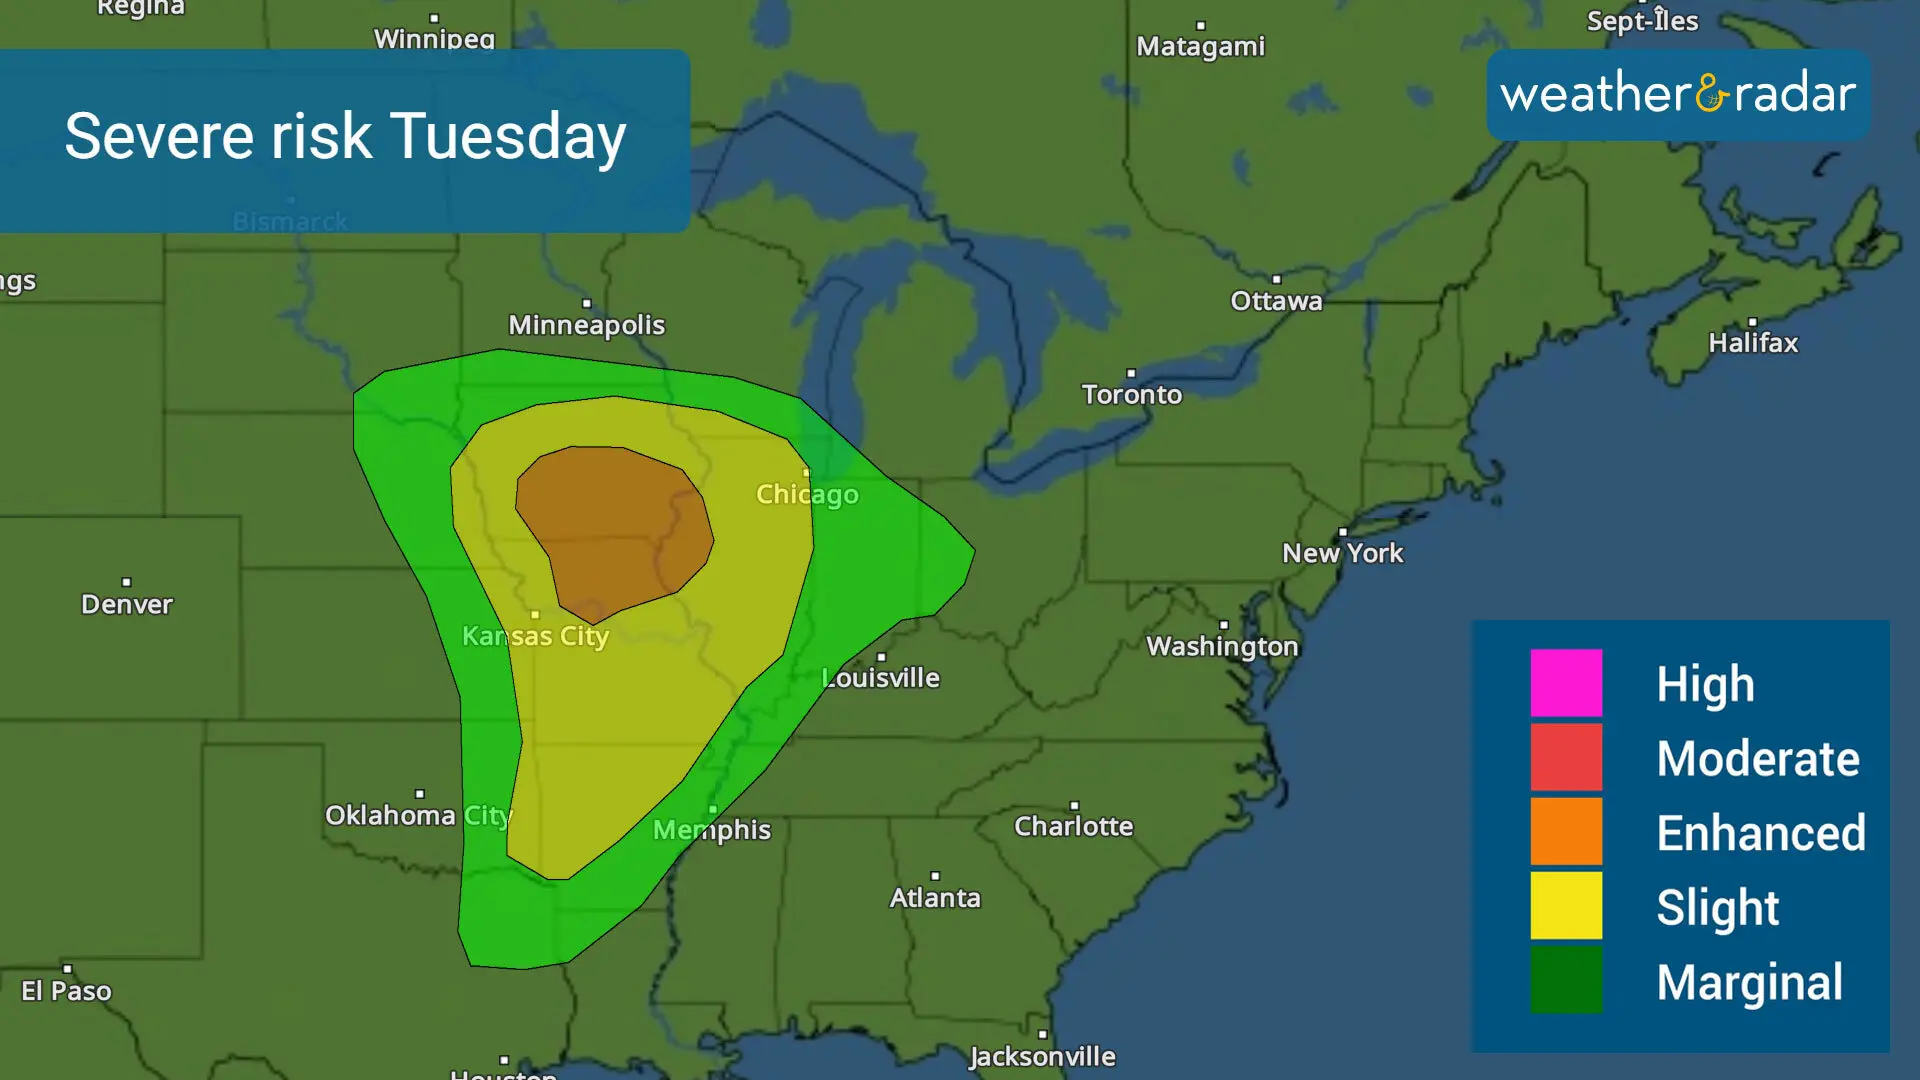 Severe weather risk on Tuesday.